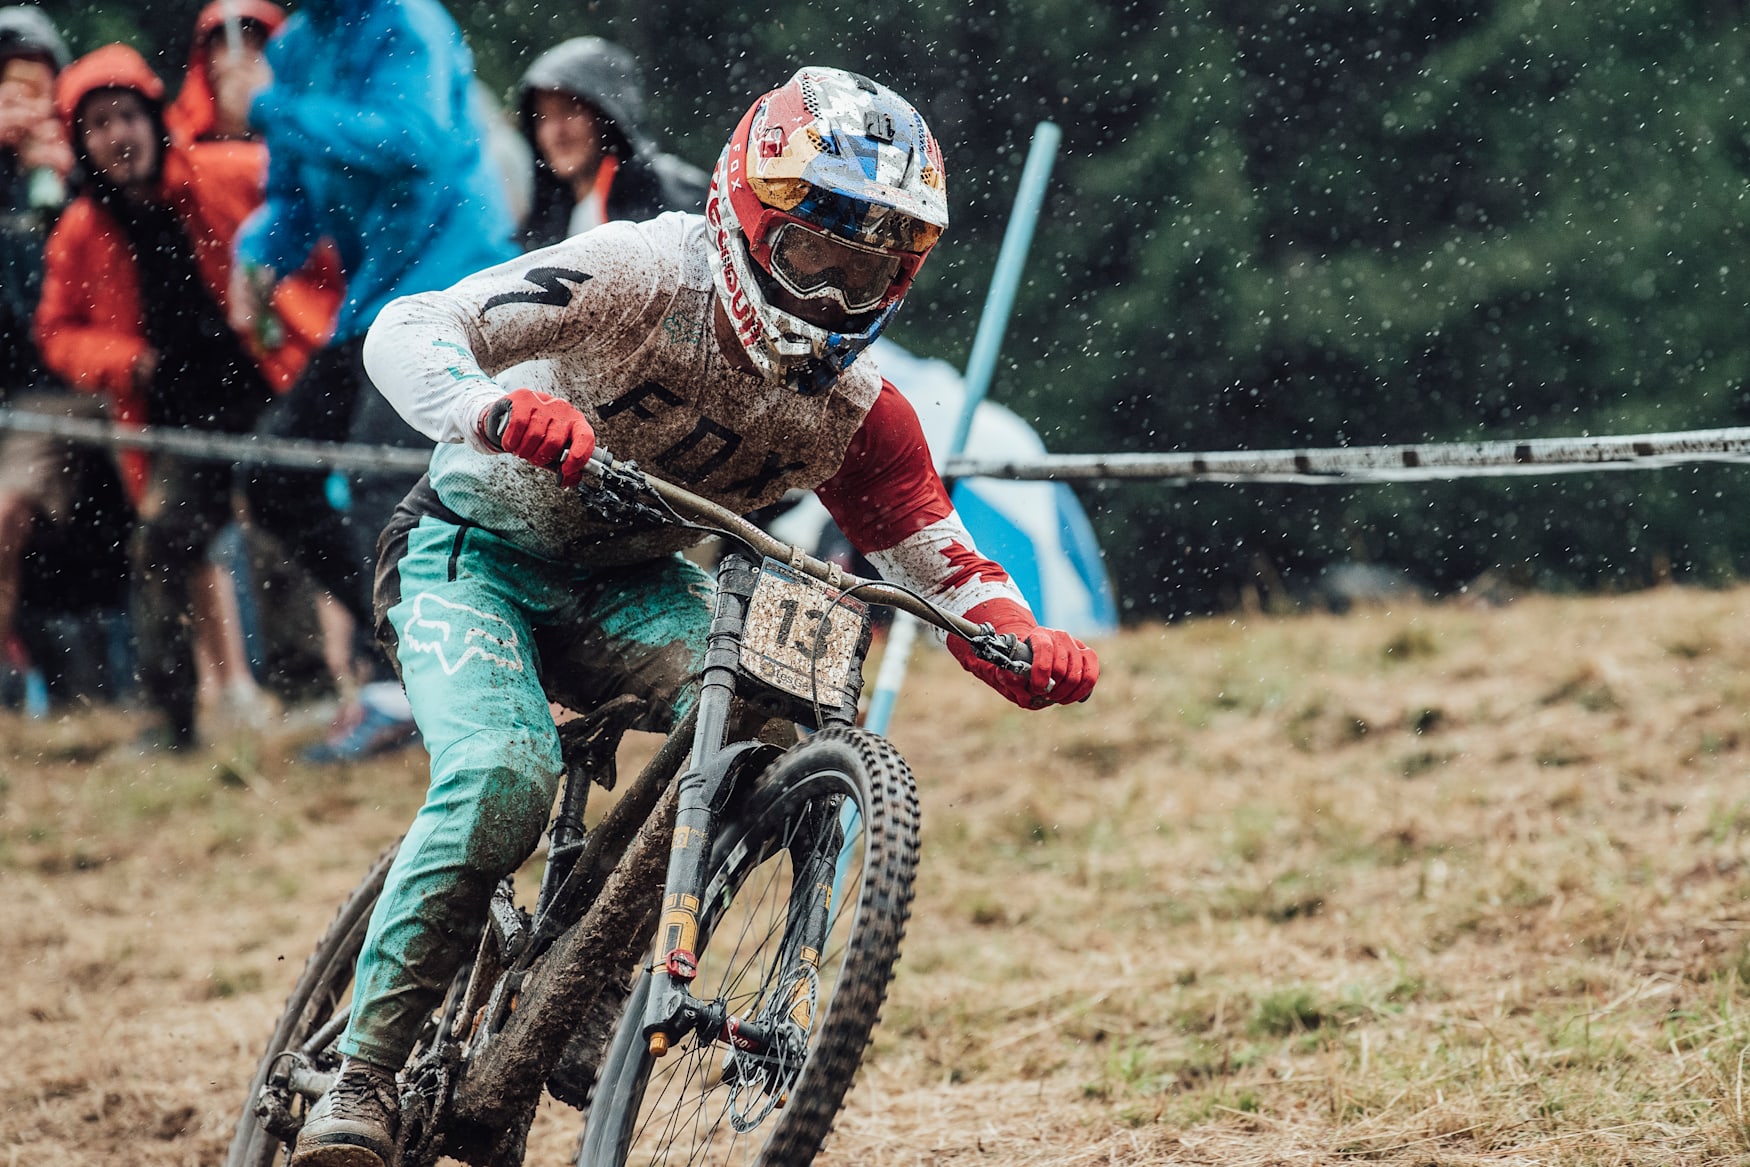 Finn Iles rides during finals at the UCI MTB Downhill World Cup at Les Gets, France, on July 3, 2021.